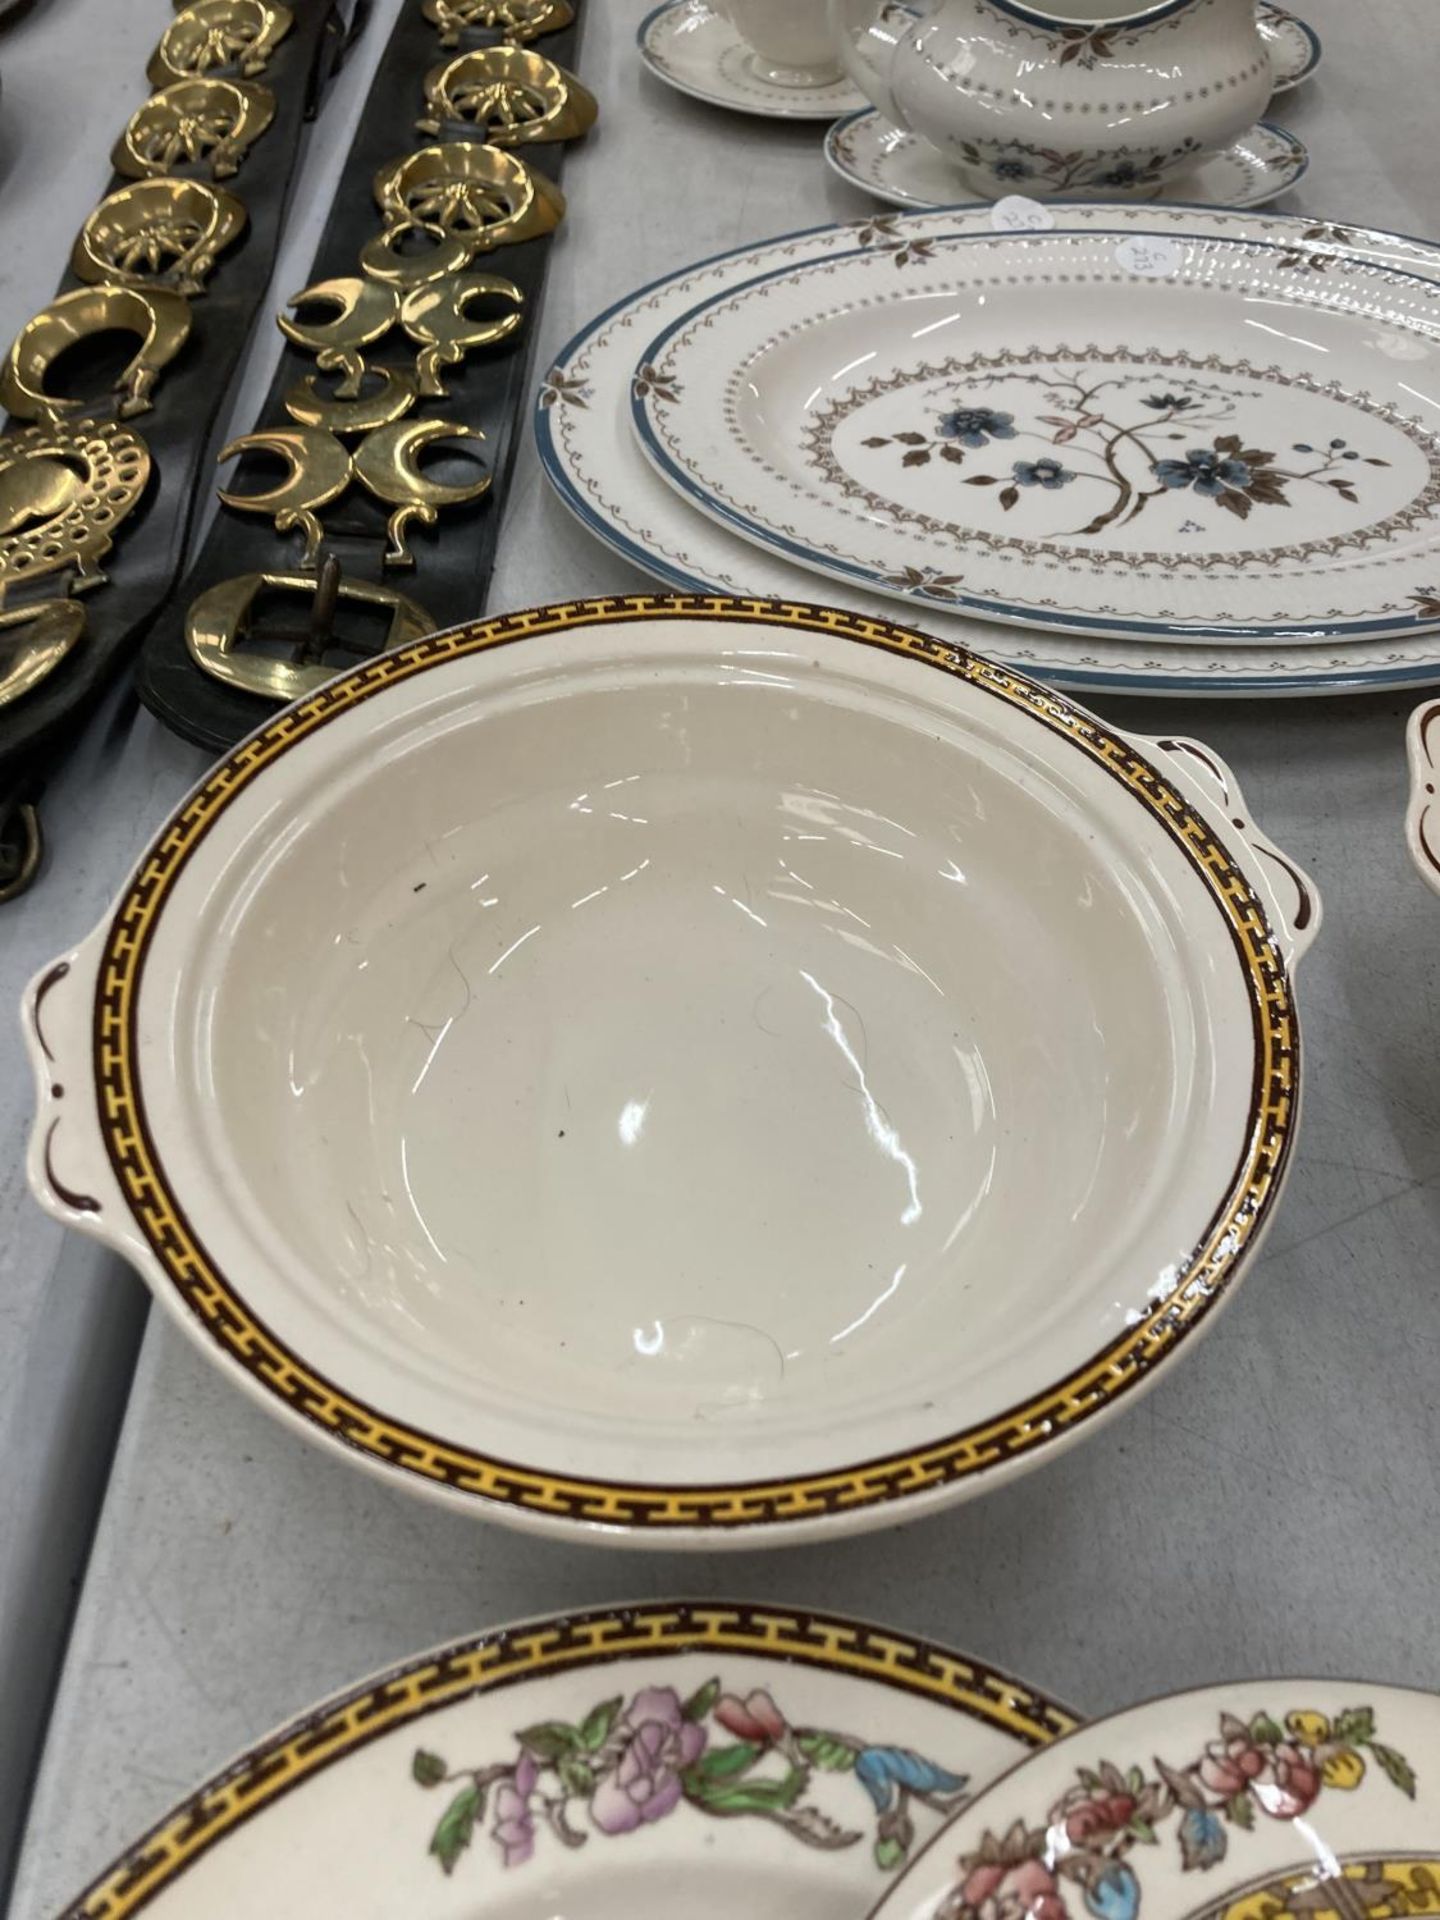 A QUANTITY OF WASHINGTON 'INDIAN TREE' DINNERWARE TO INCLUDE PLATES, BOWLS, TUREEN, SAUCE BOAT, ETC - Image 2 of 6